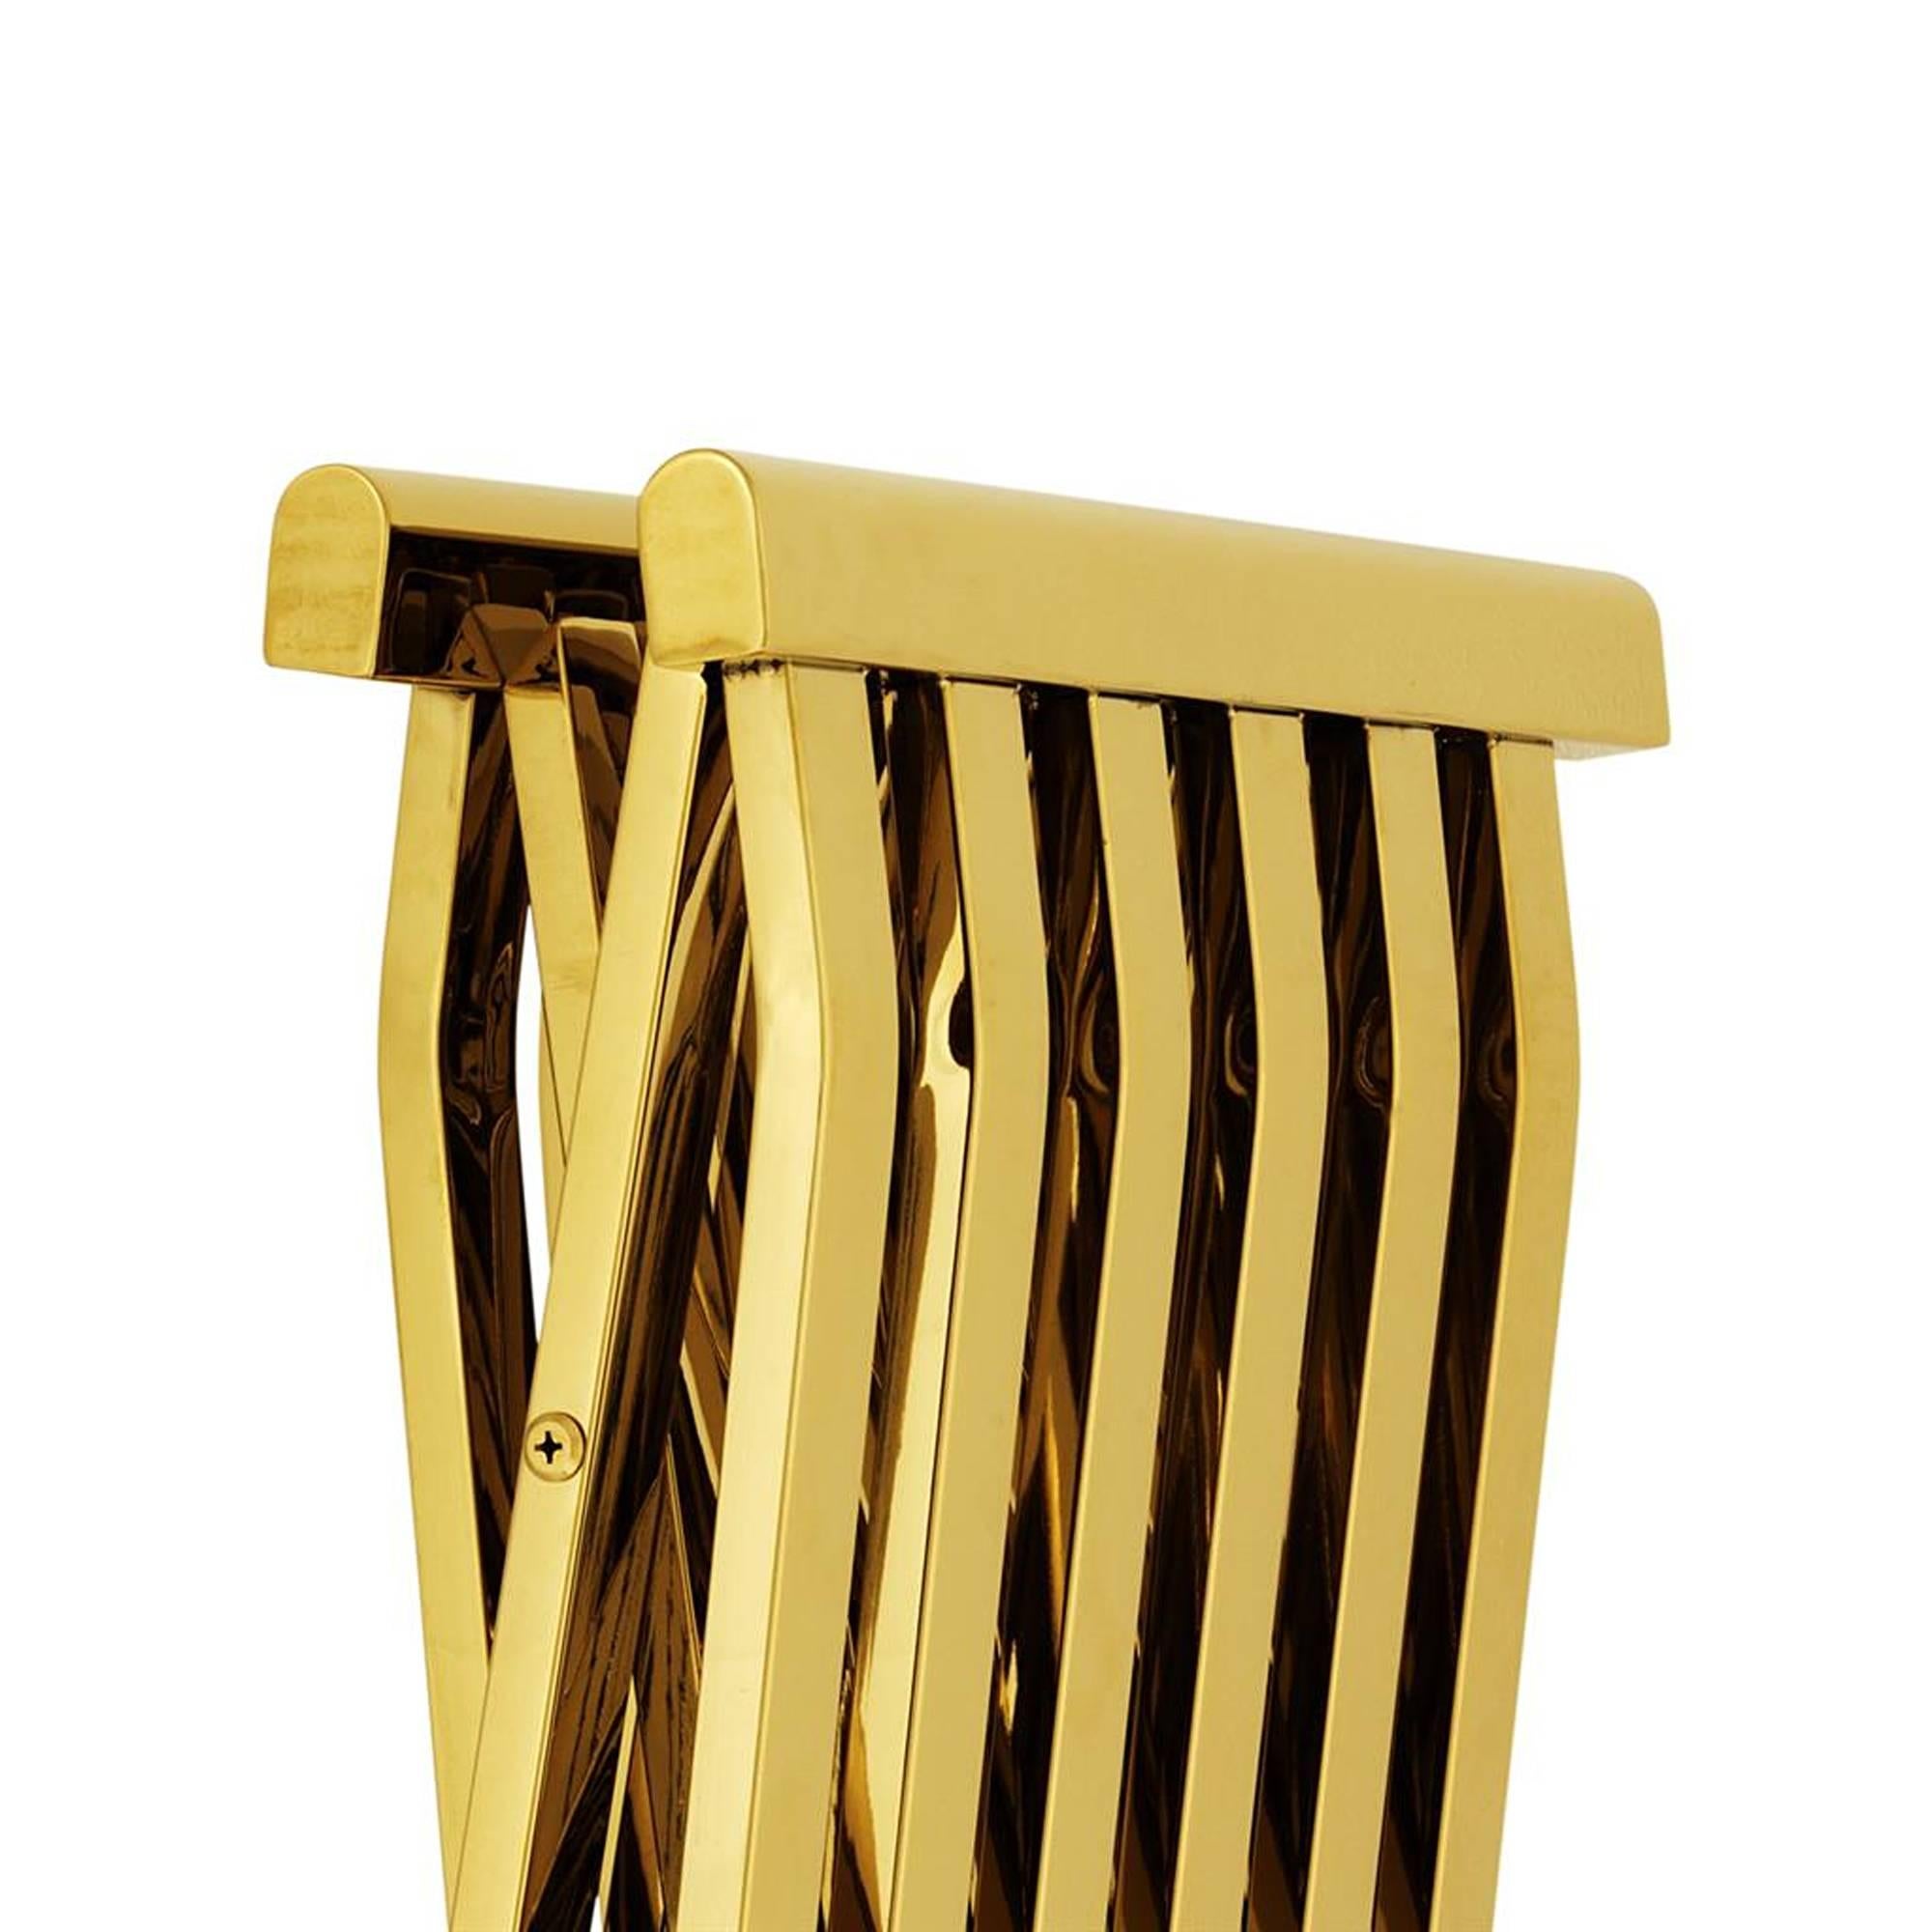 Polished Cesar Chair Foldable Gold Finish Stainless Steel